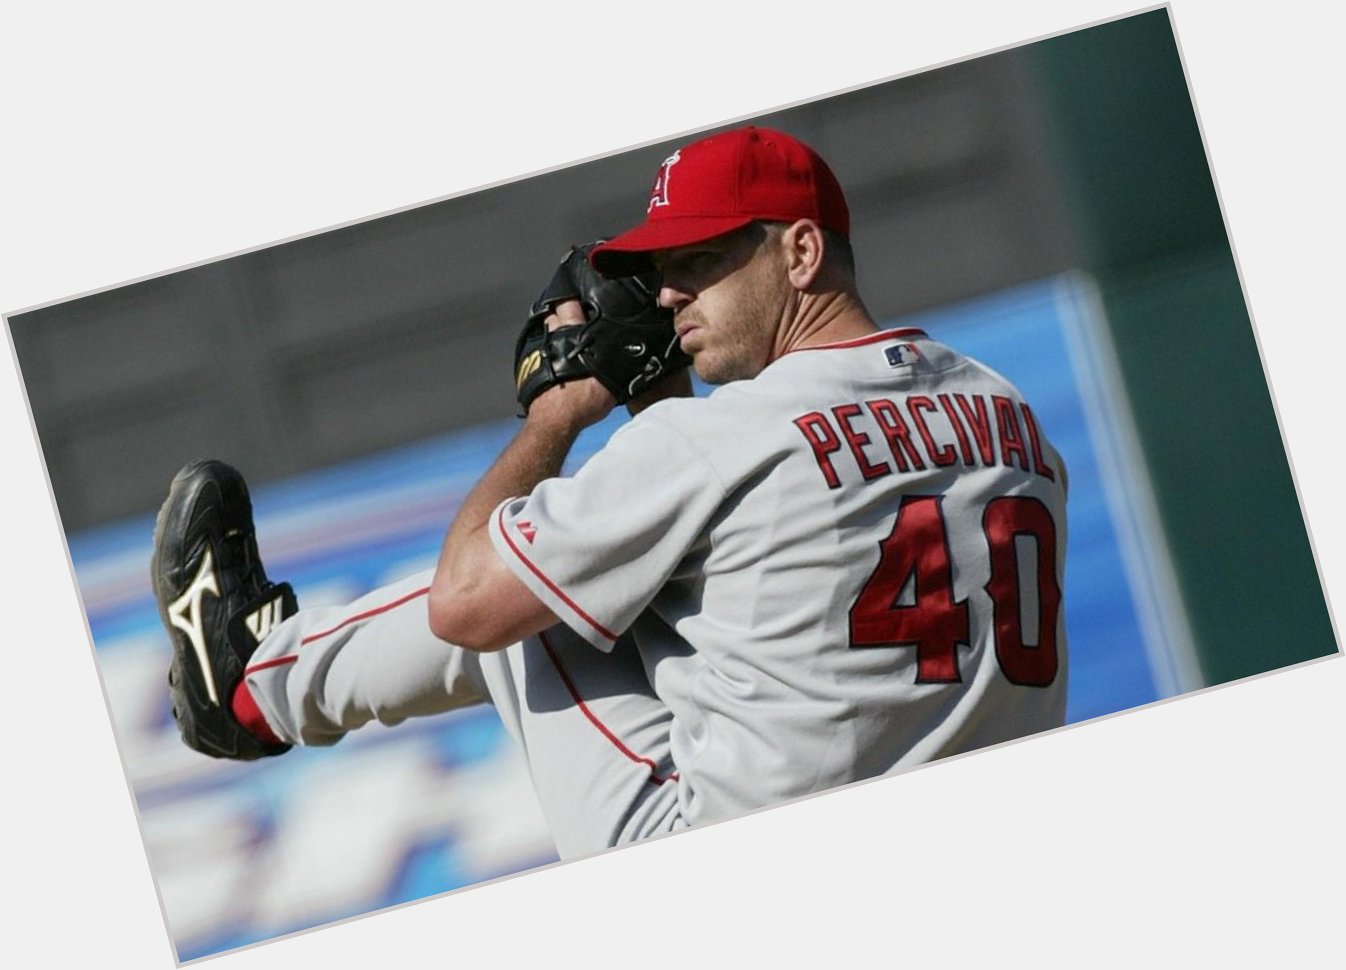 Happy 48th bday to flame throwing closer Troy Percival. 358 career saves with 9.9 k/9. Made 4 all-star teams. 